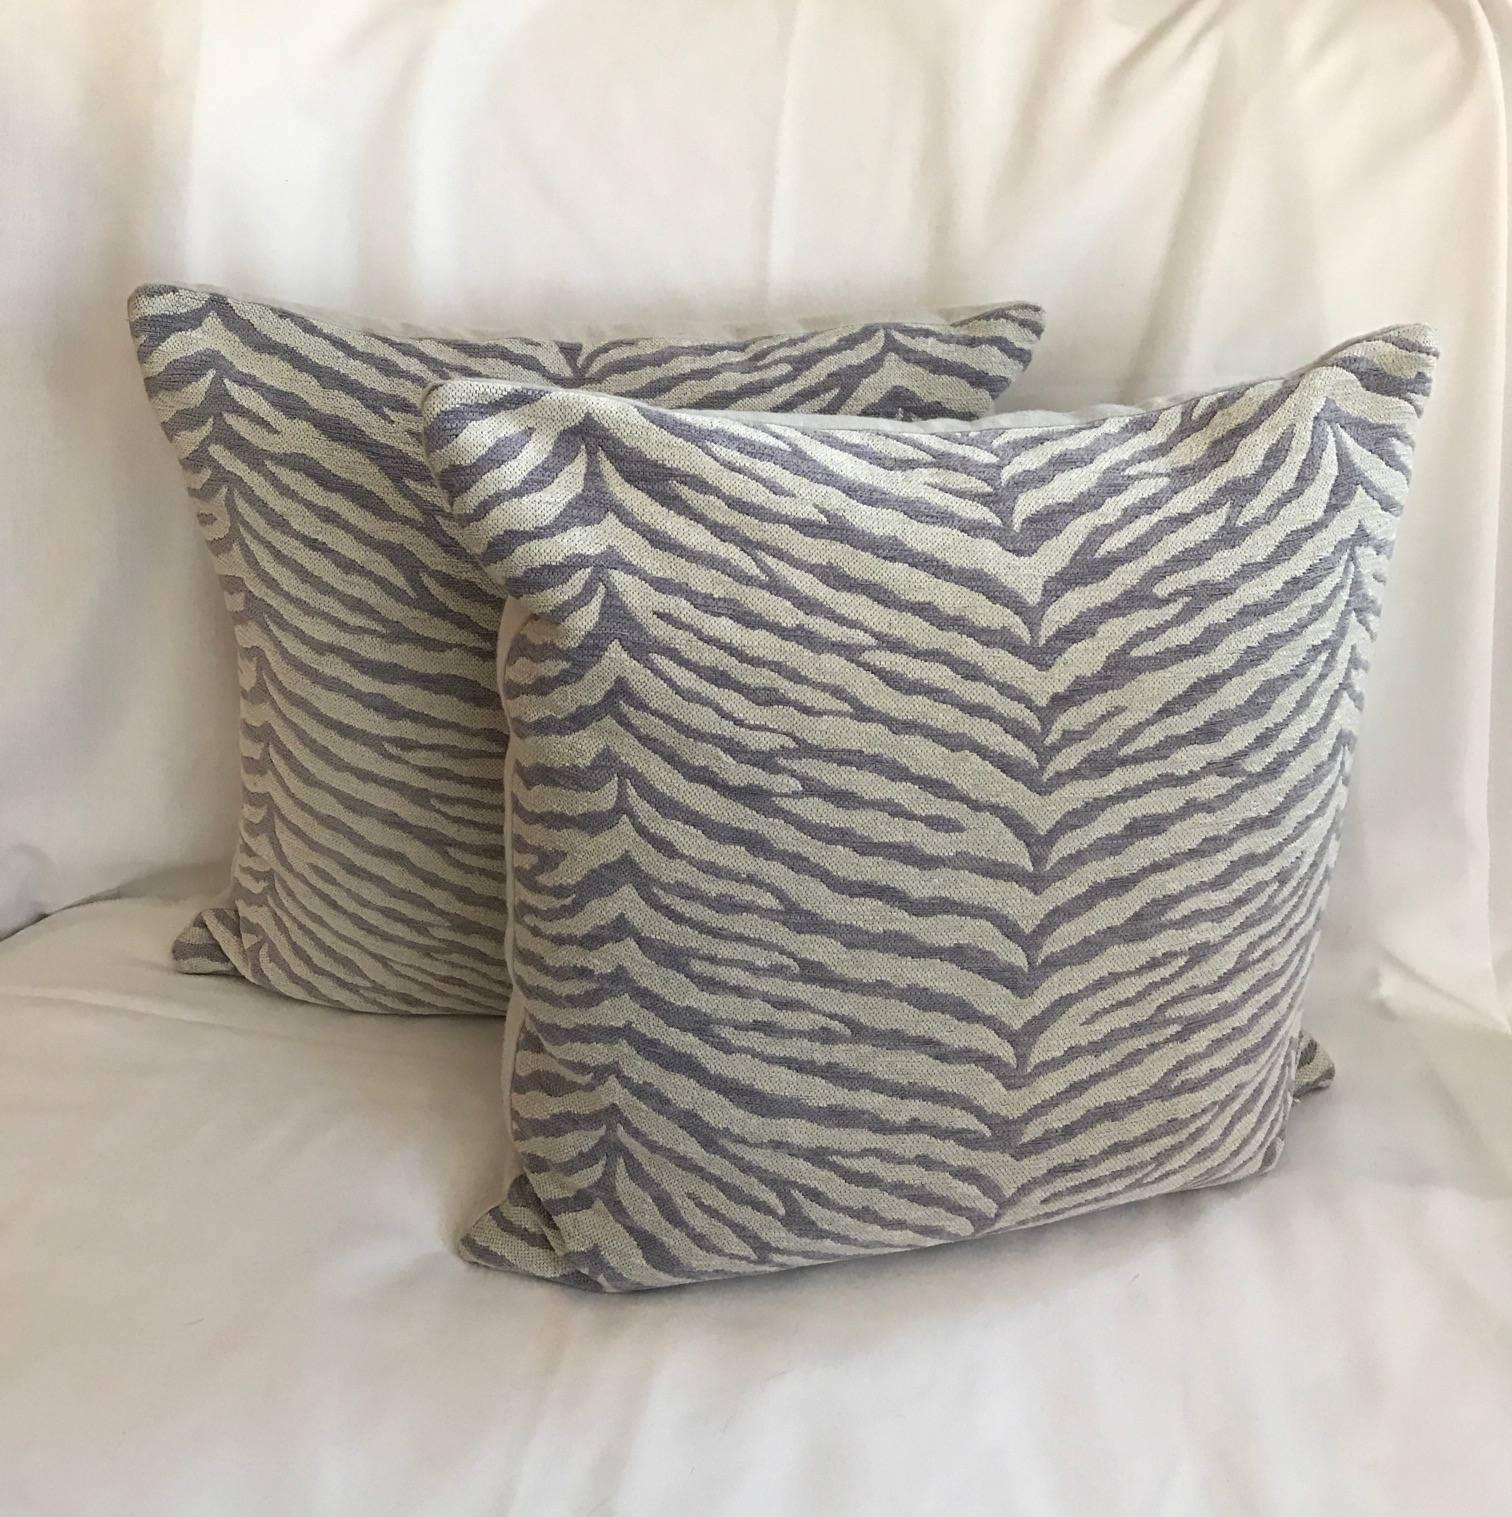 Set of two lavender and white glorious Schumacher fabric pillows. A fun zebra stripped design with an off-white background and backing. Down stuffed. Very pretty.

In 1950, First Lady Bess Truman selected fabric from F. Schumacher & Co. designed